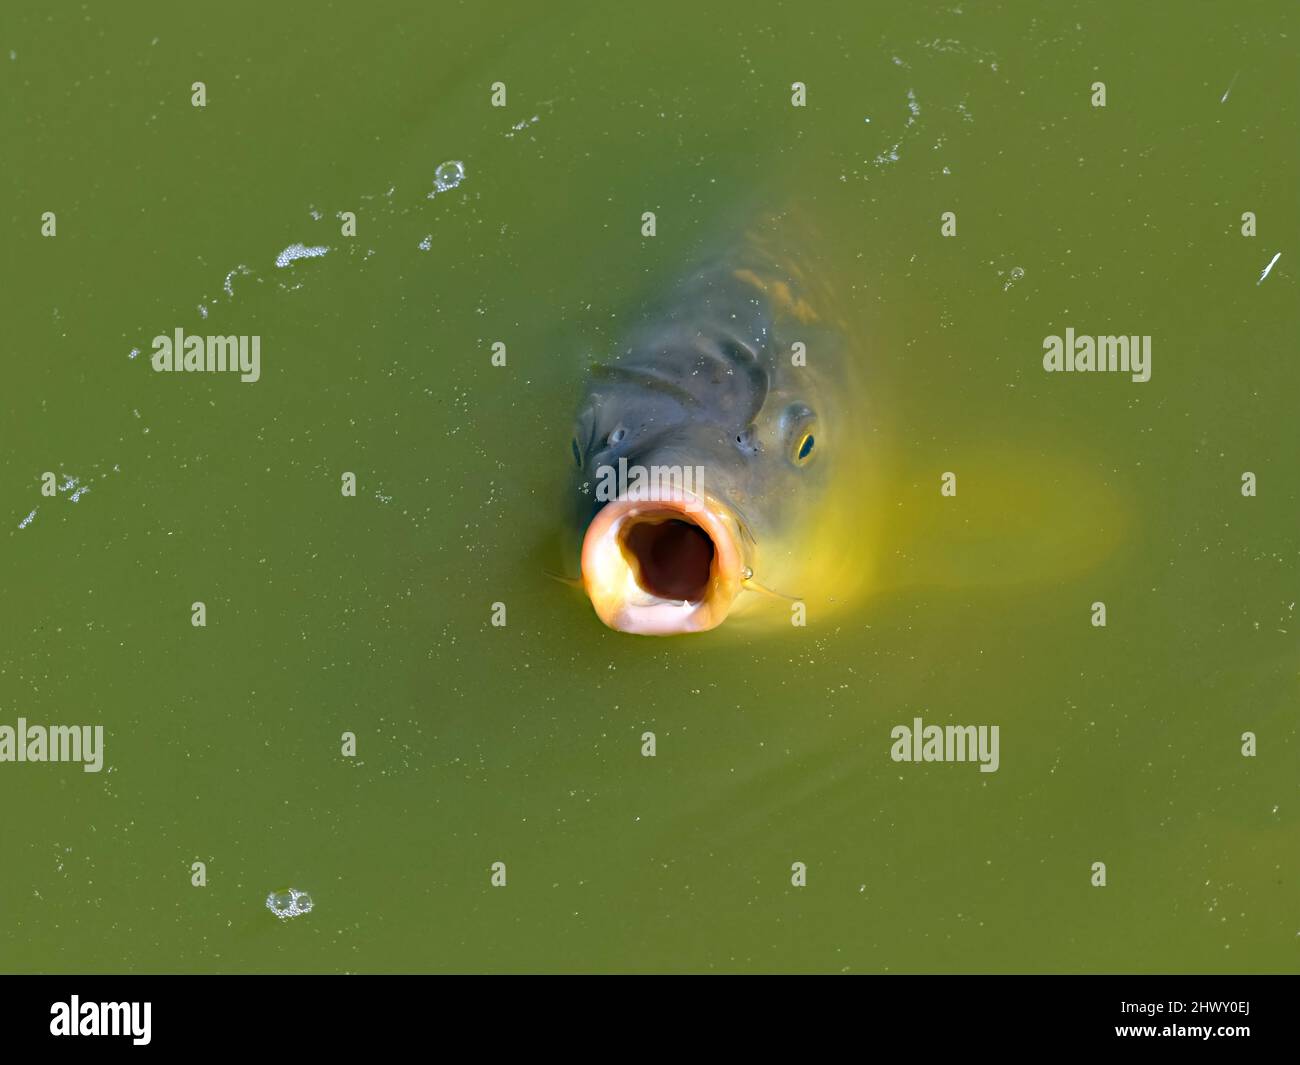 Carp (Cyprinus) at the surface of water opening his mouth wide Stock Photo